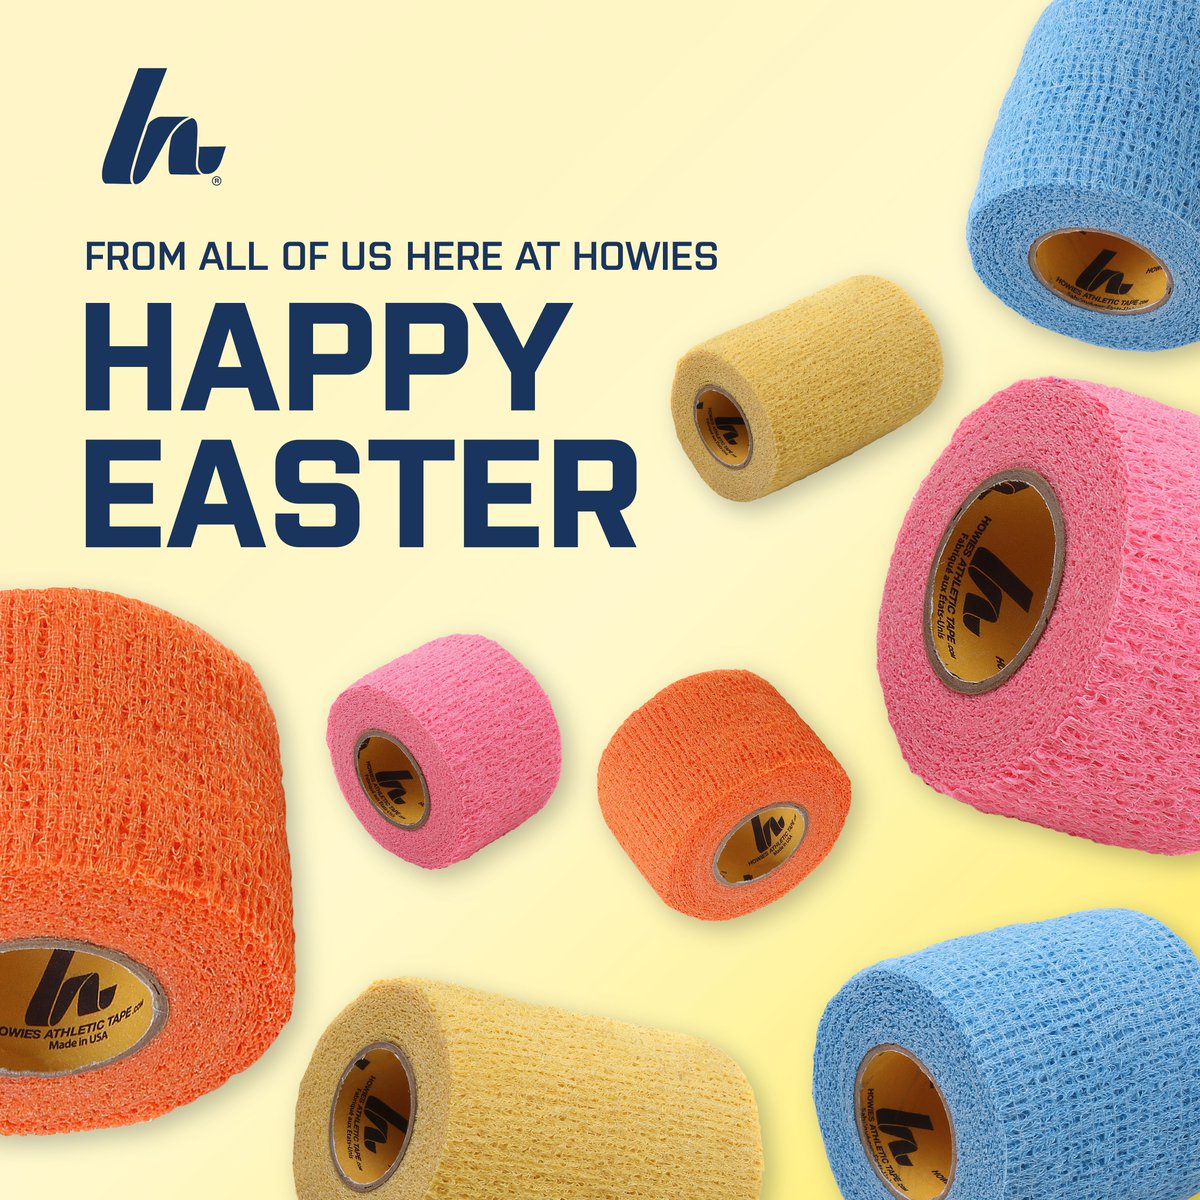 Hoppy Easter 🐰 from the Howies family to you! Hope you all find countless rolls of tape in your easter eggs! #StickWithTheBest